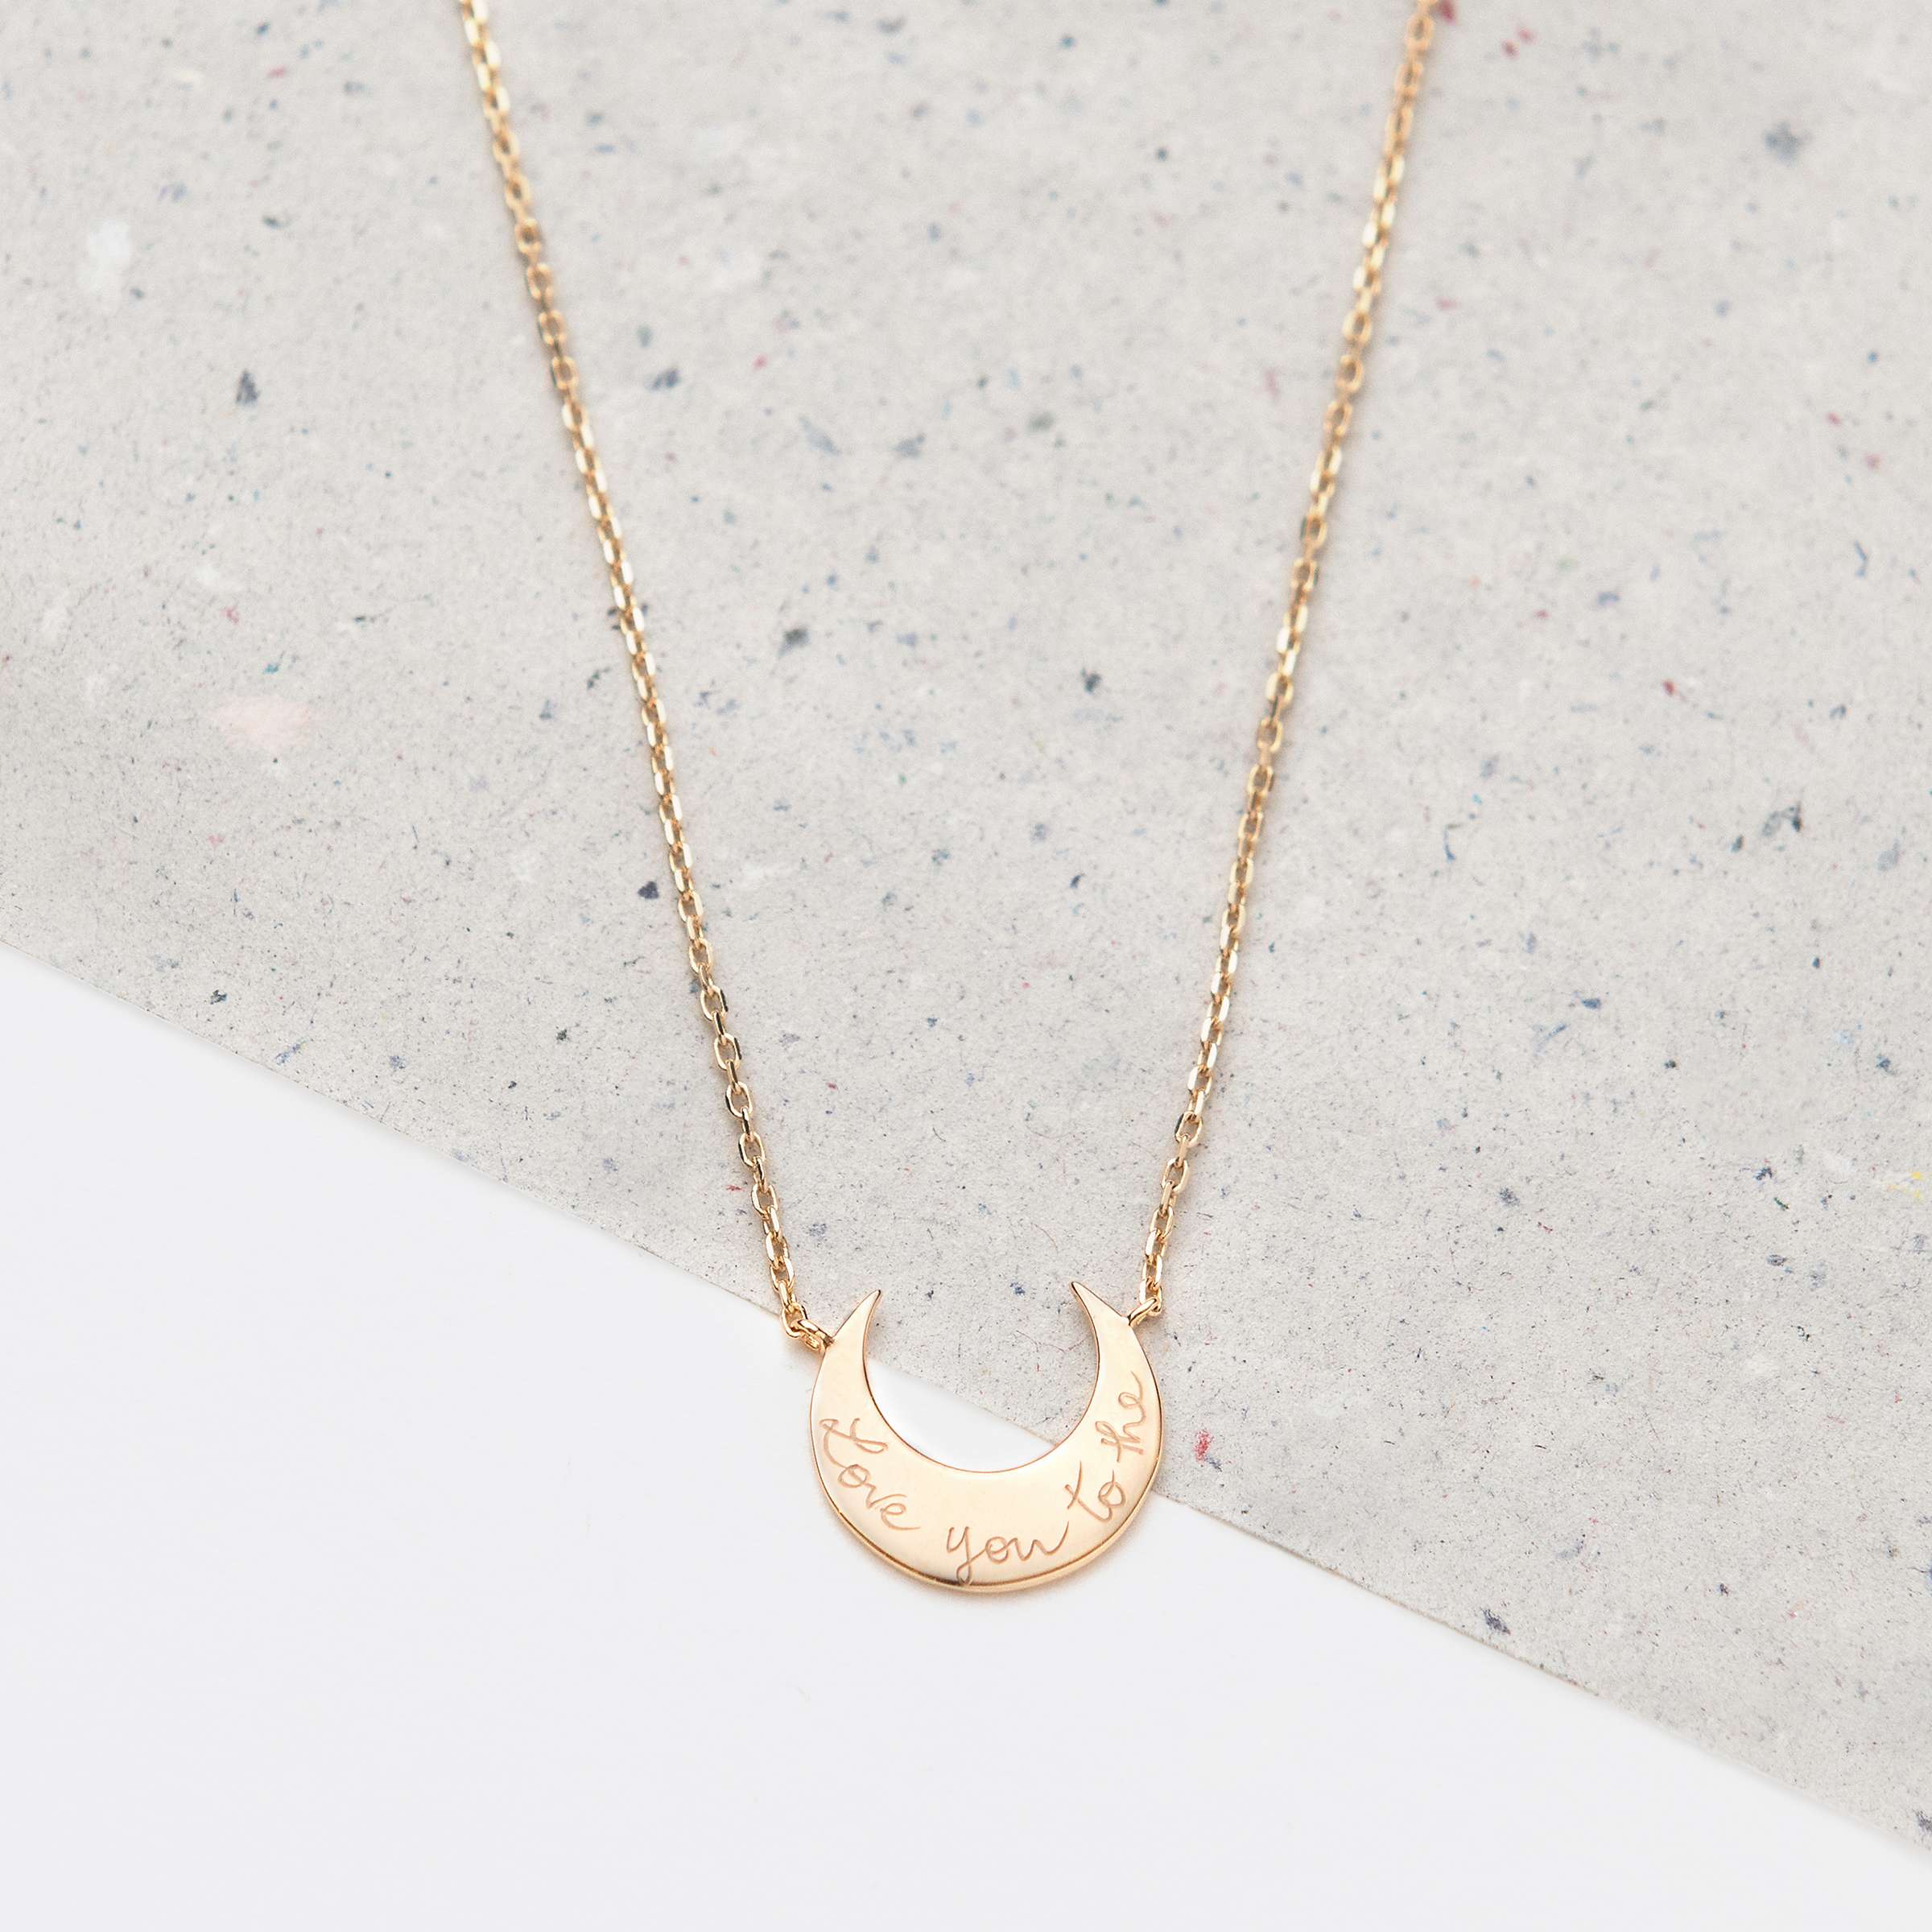 Buy Merci Maman Personalised Crescent Moon Pendant Necklace Online at johnlewis.com